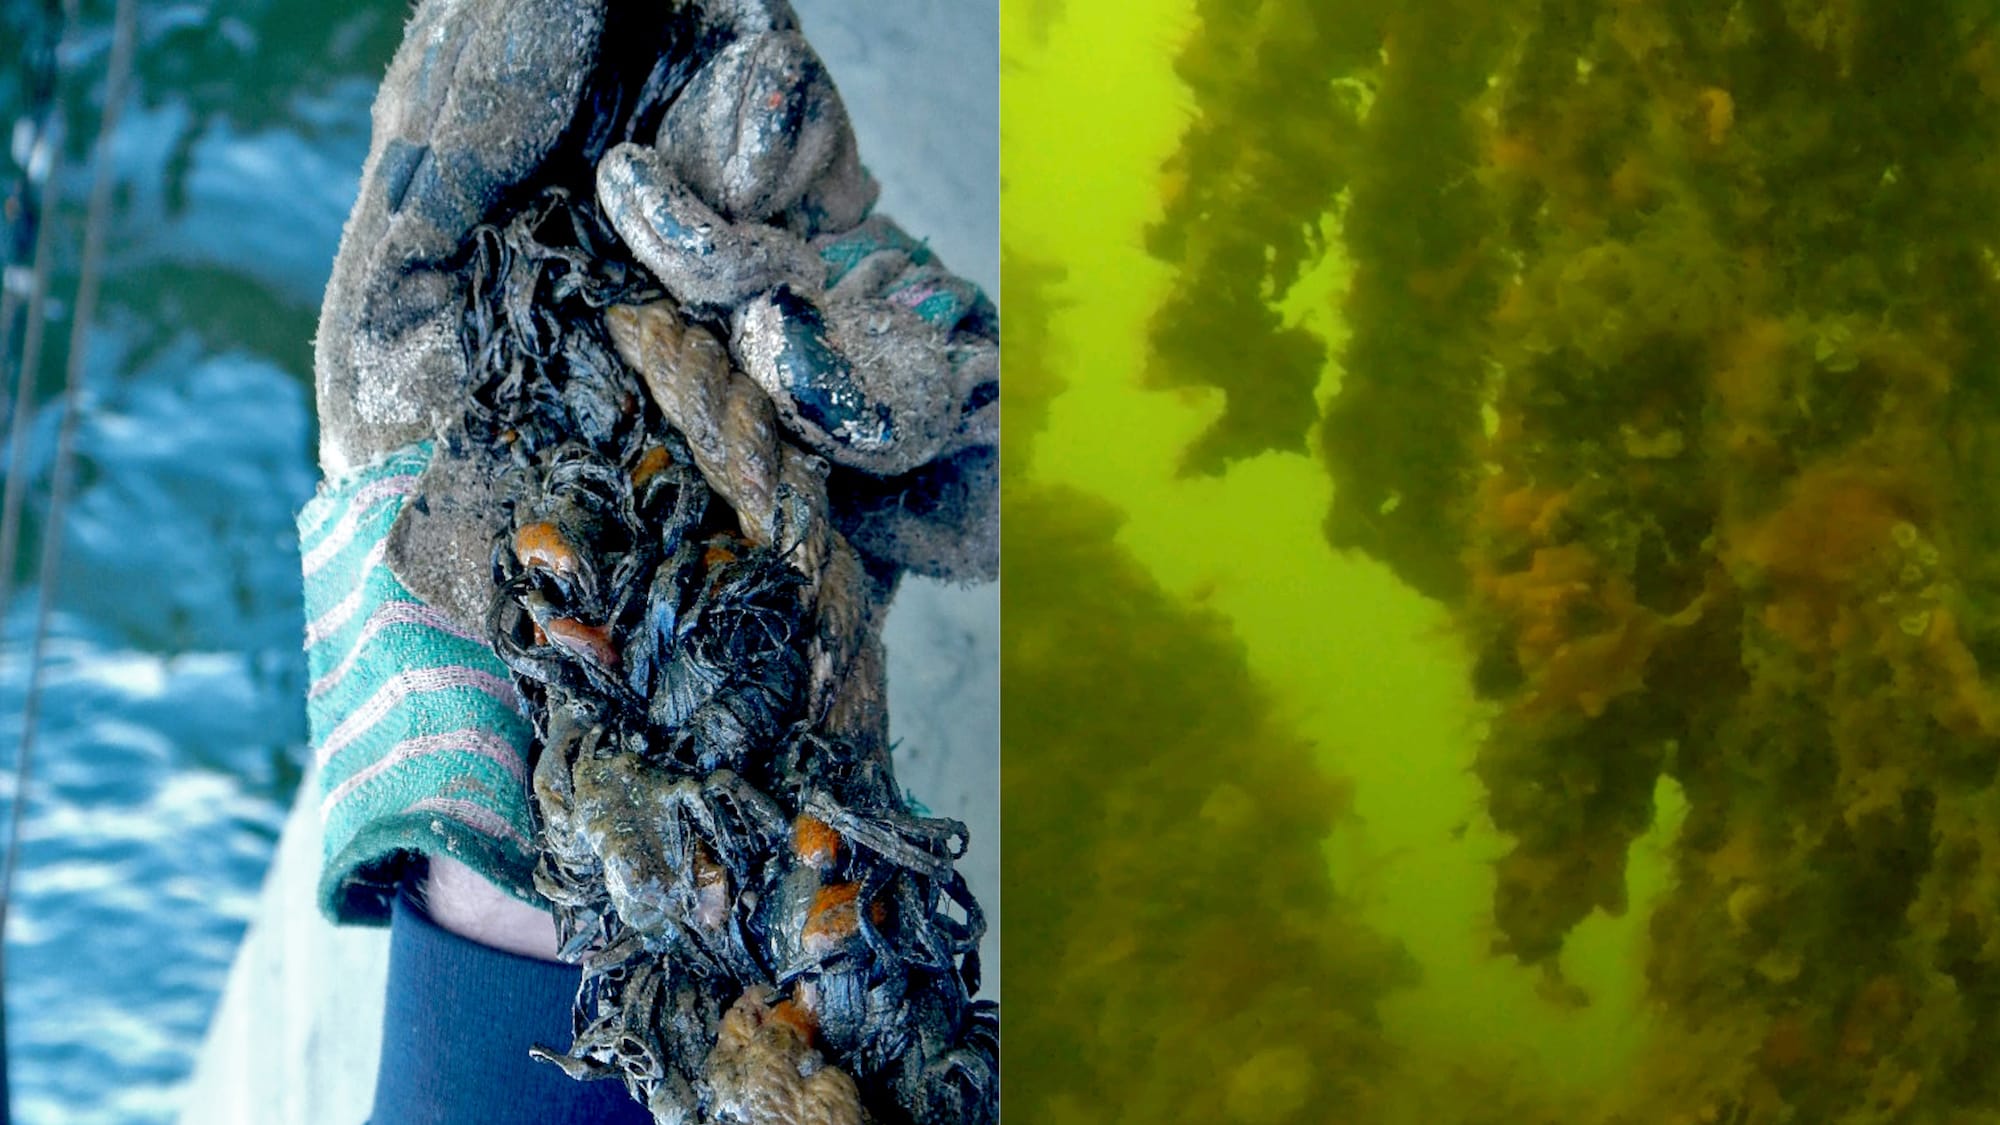 Left: Mussel spat fuzzy rope being installed by SCAPE, Gowanus Bay, NY. Right: View after installation with diverse biomass. © SCAPE Landscape Architecture